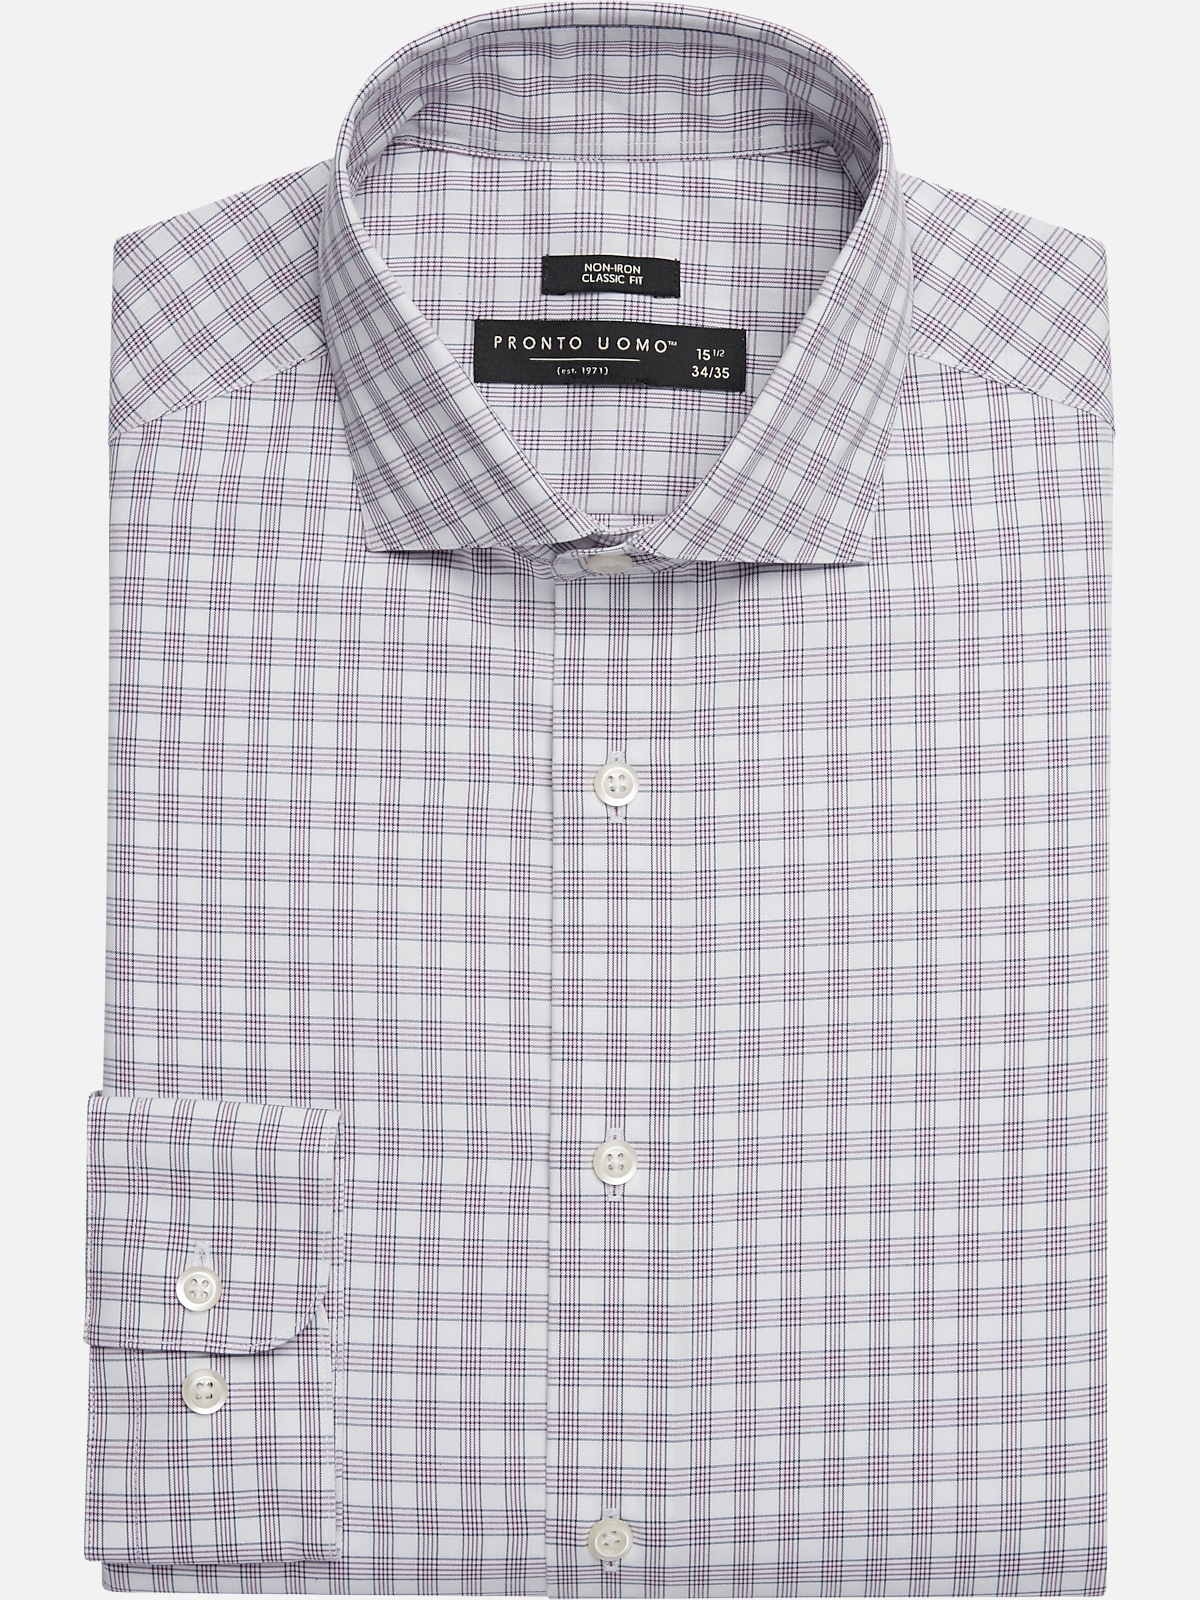 Pronto Uomo Classic Fit Triple Check Dress Shirt | All Clearance $39.99 ...